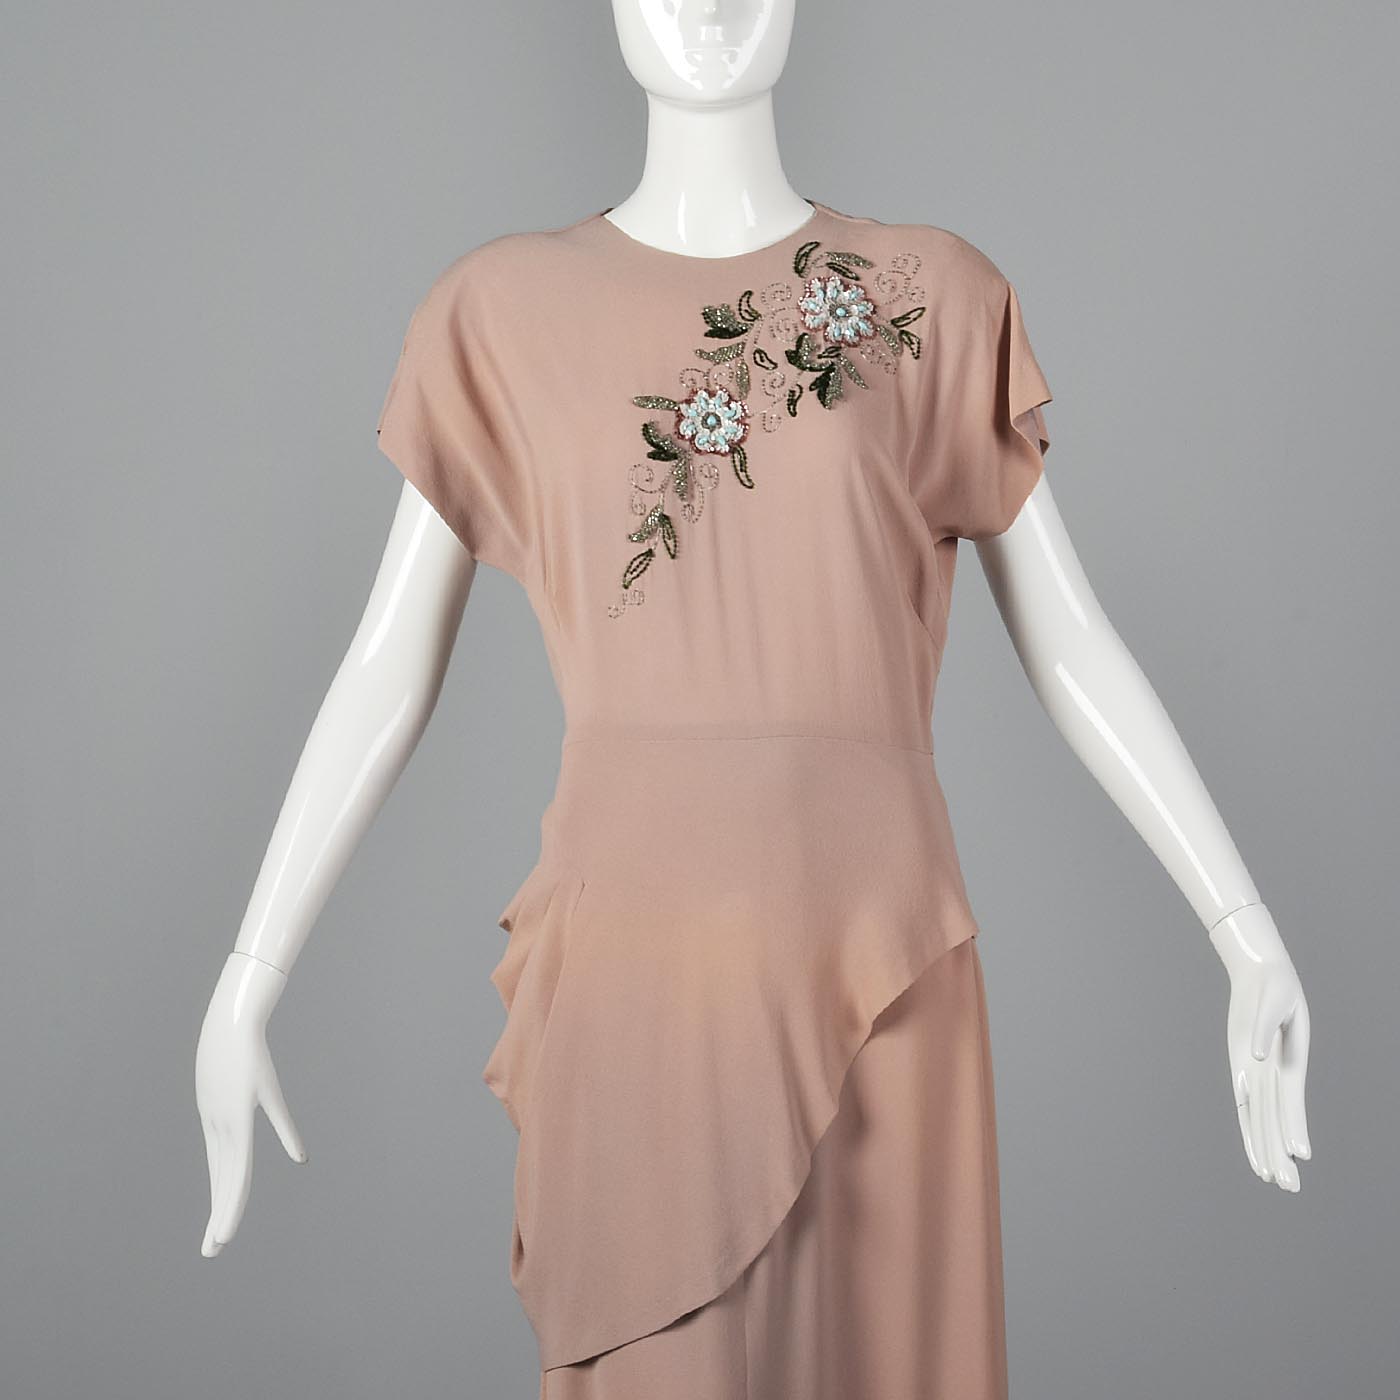 1940s Peach Crepe Gown with Floral Beaded Bodice